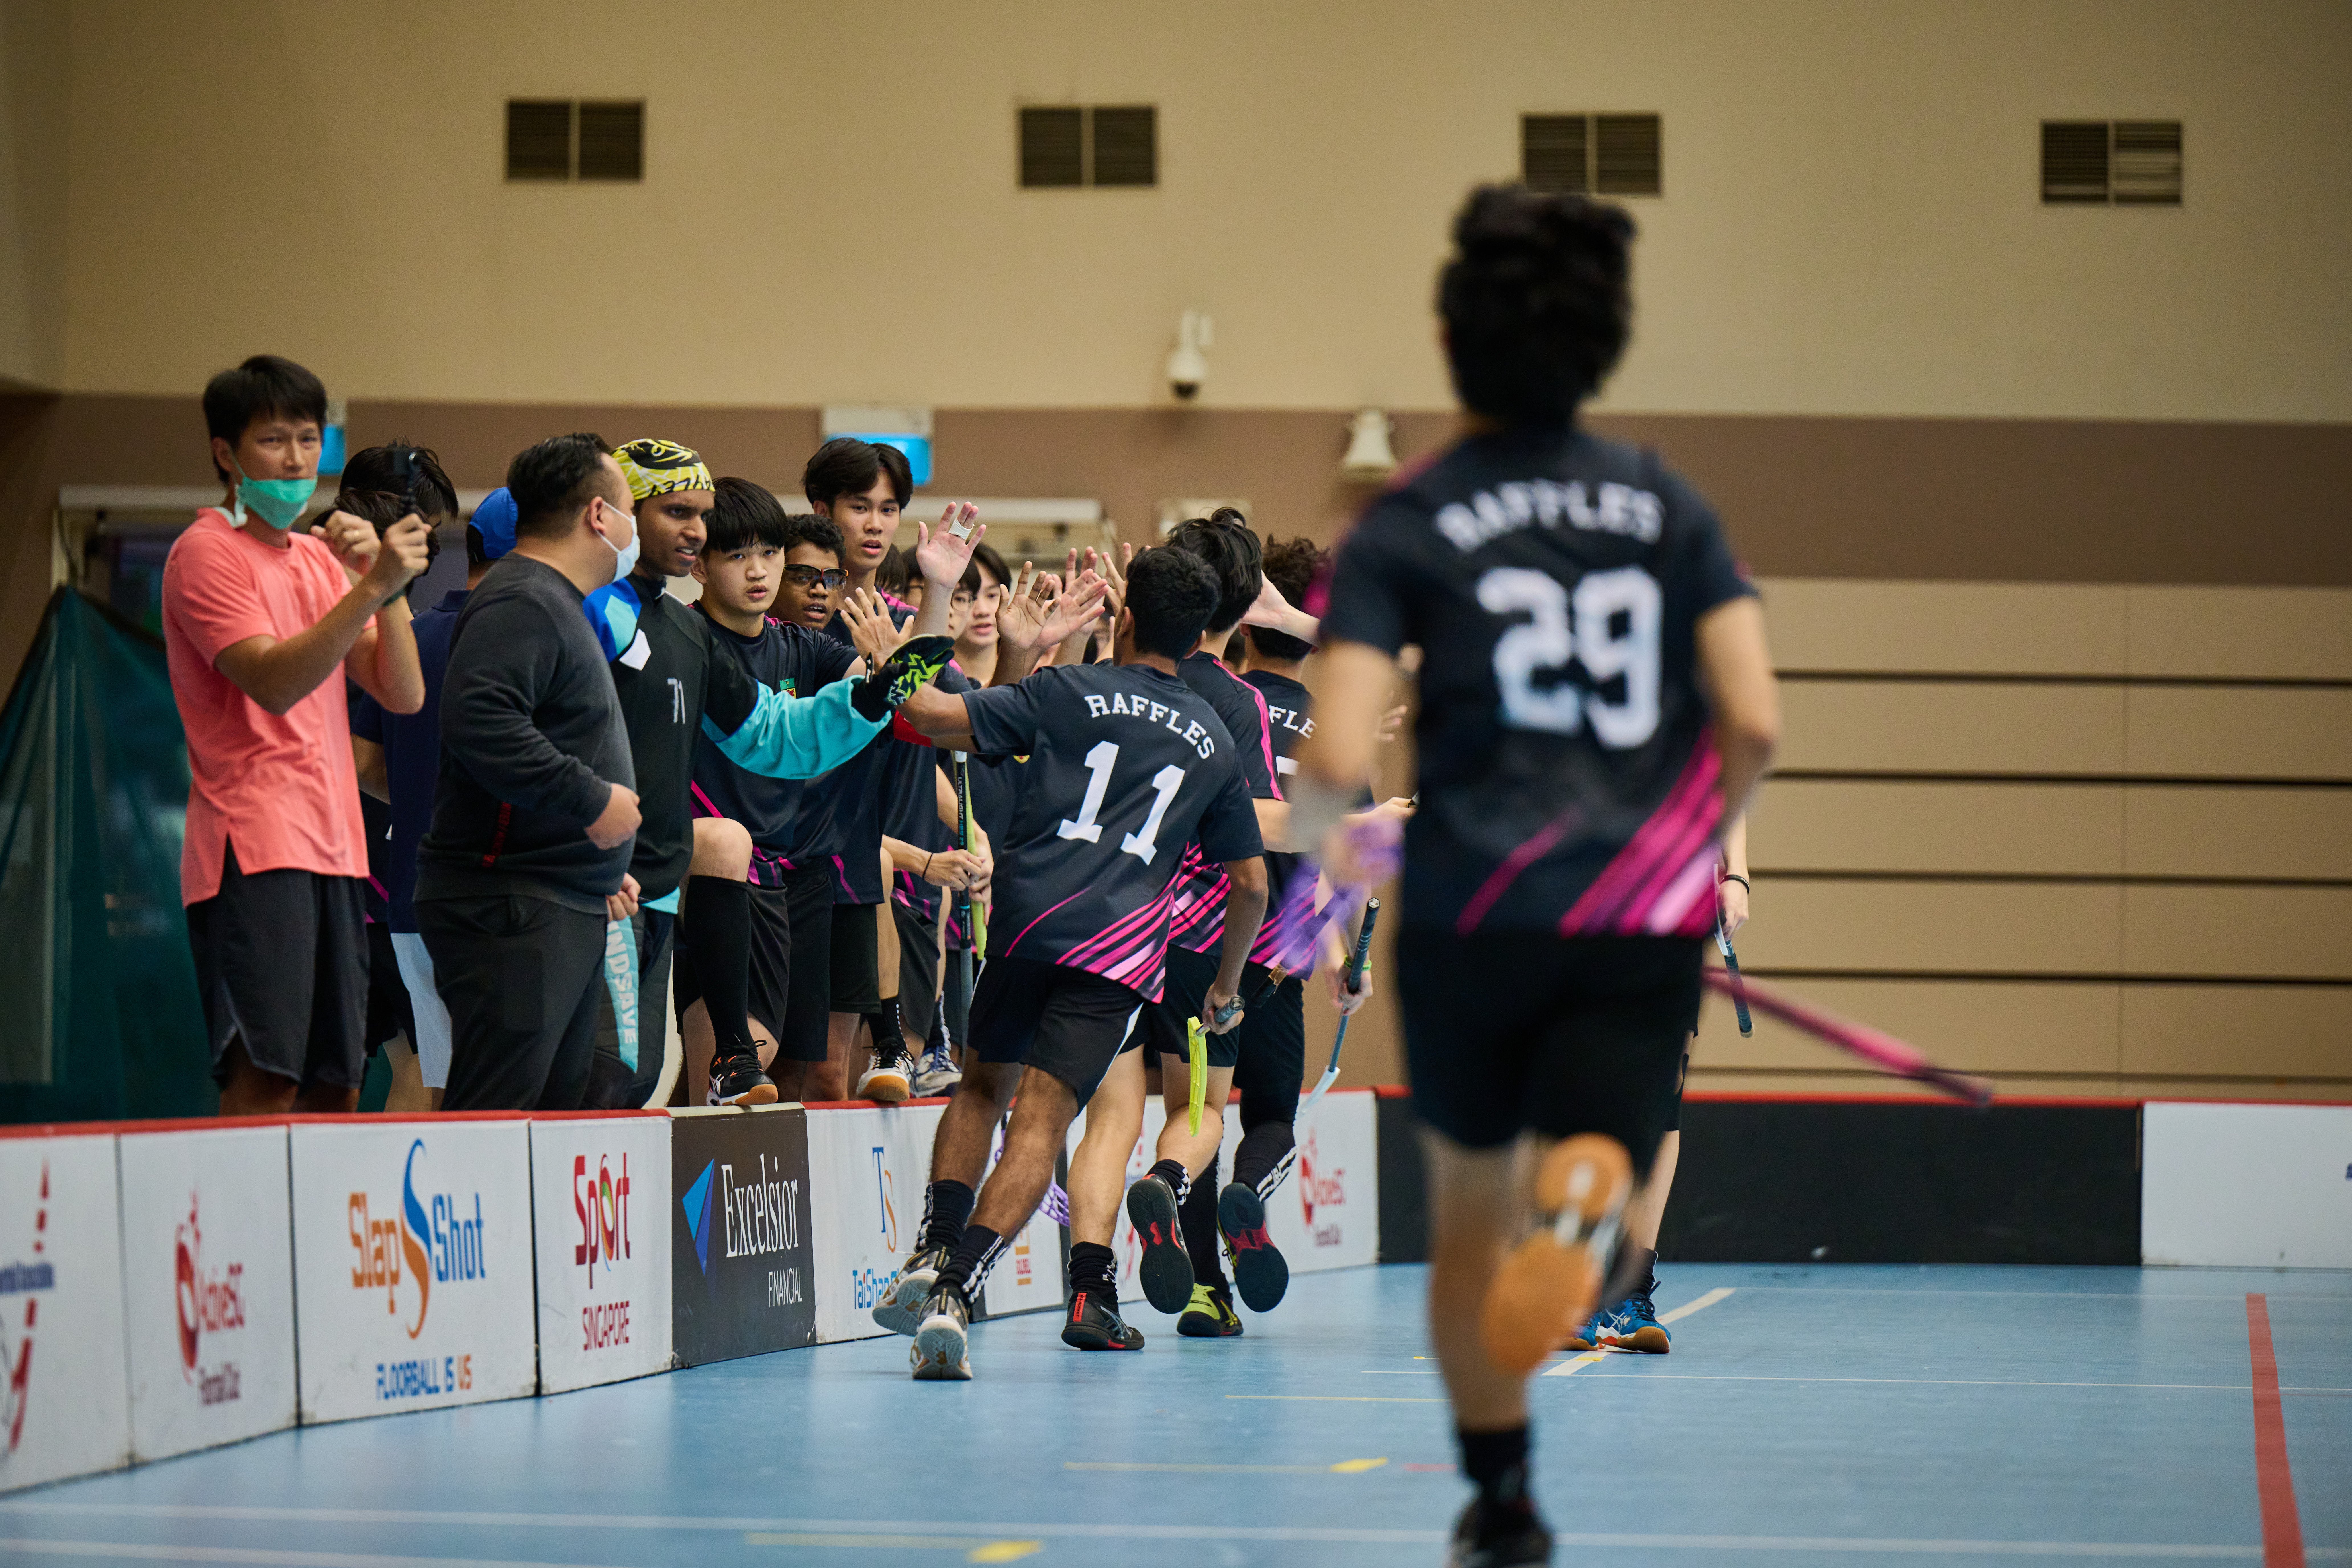 20220519_20220519 SSSC Floorball National A Div Boys Semi Finals Raffles Junior College Vs Anglo-Chinese Junior College_Siaw Woon Chong_0005